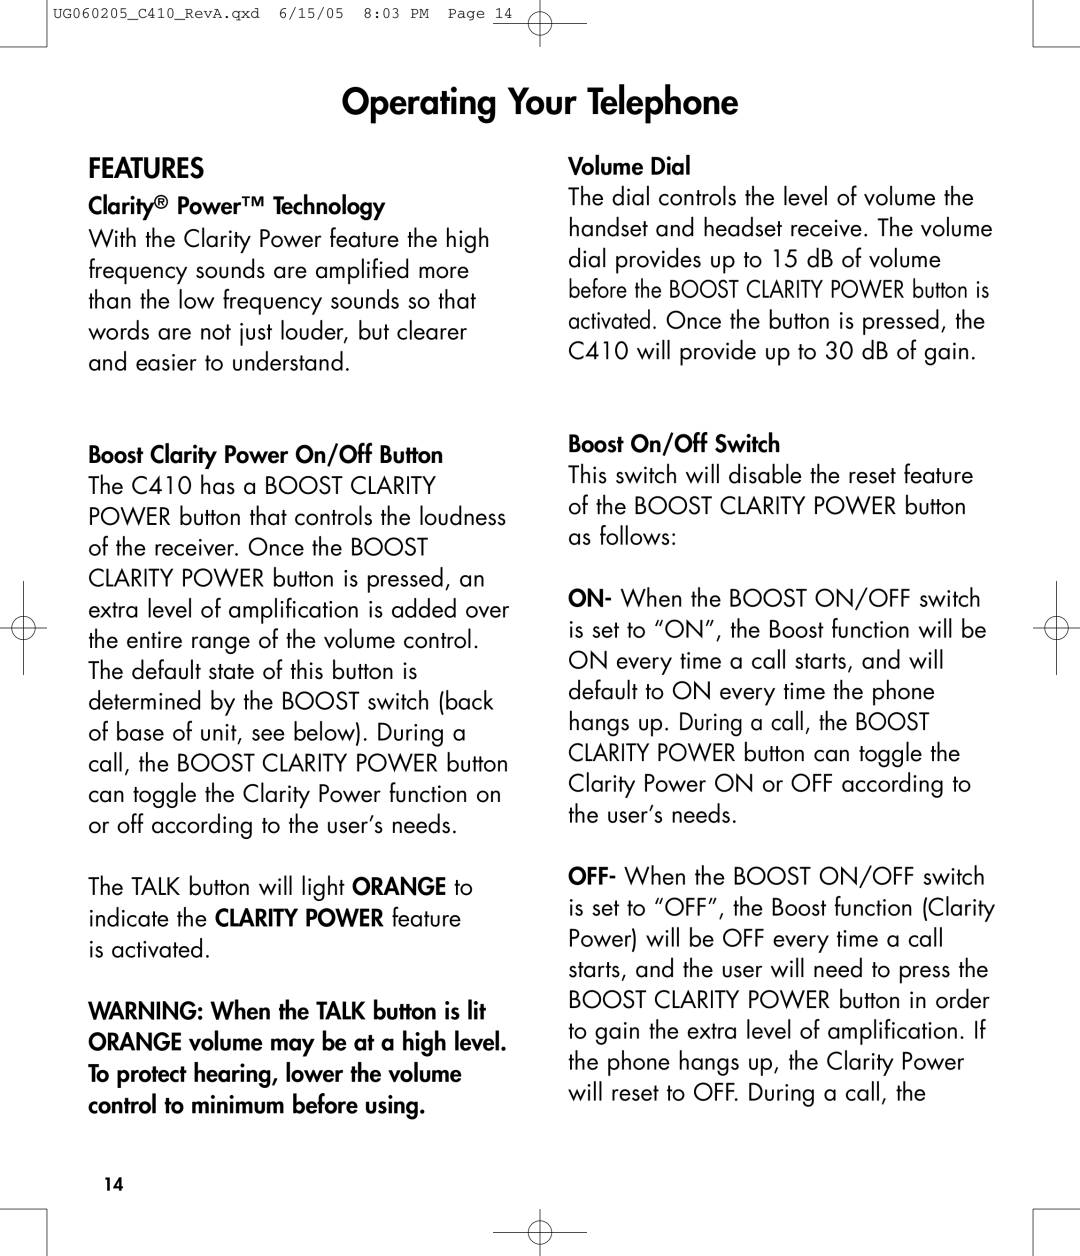 Clarity C410 owner manual Operating Your Telephone, Features 